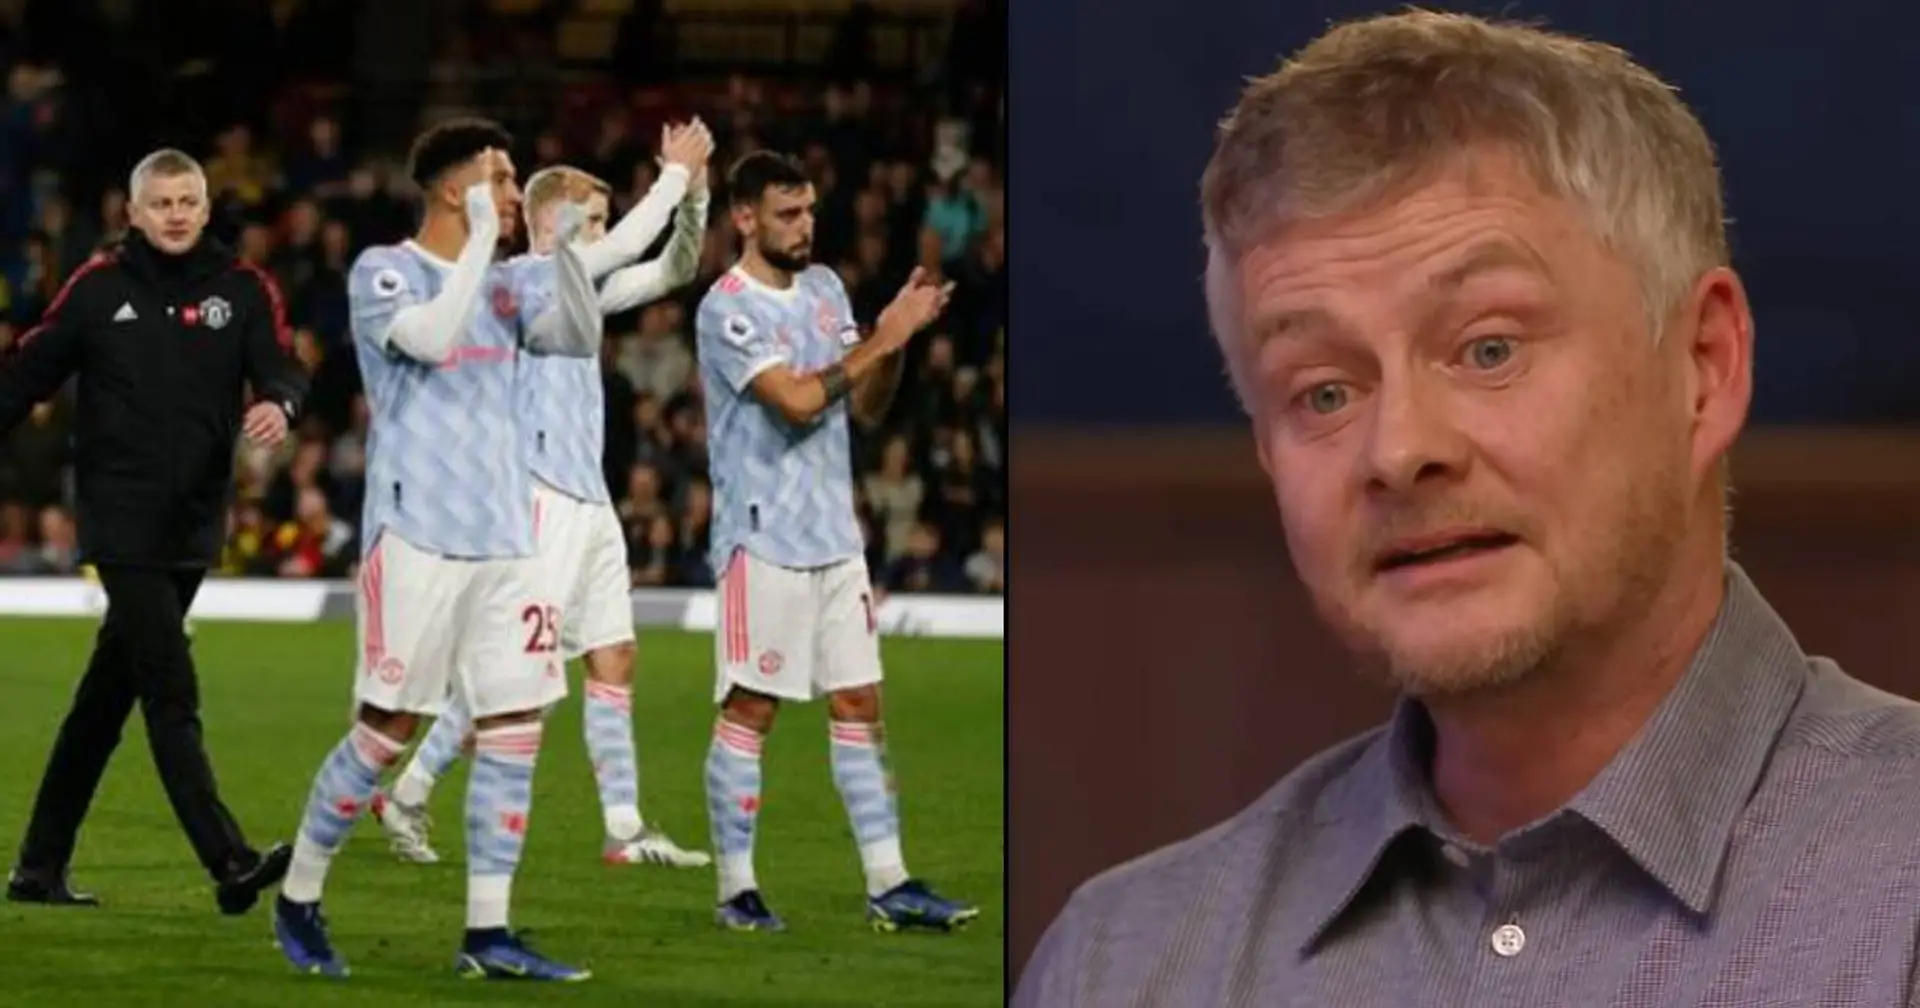 Ole Gunnar Solskjaer calls out Man United players for 'leaking' dressing room info